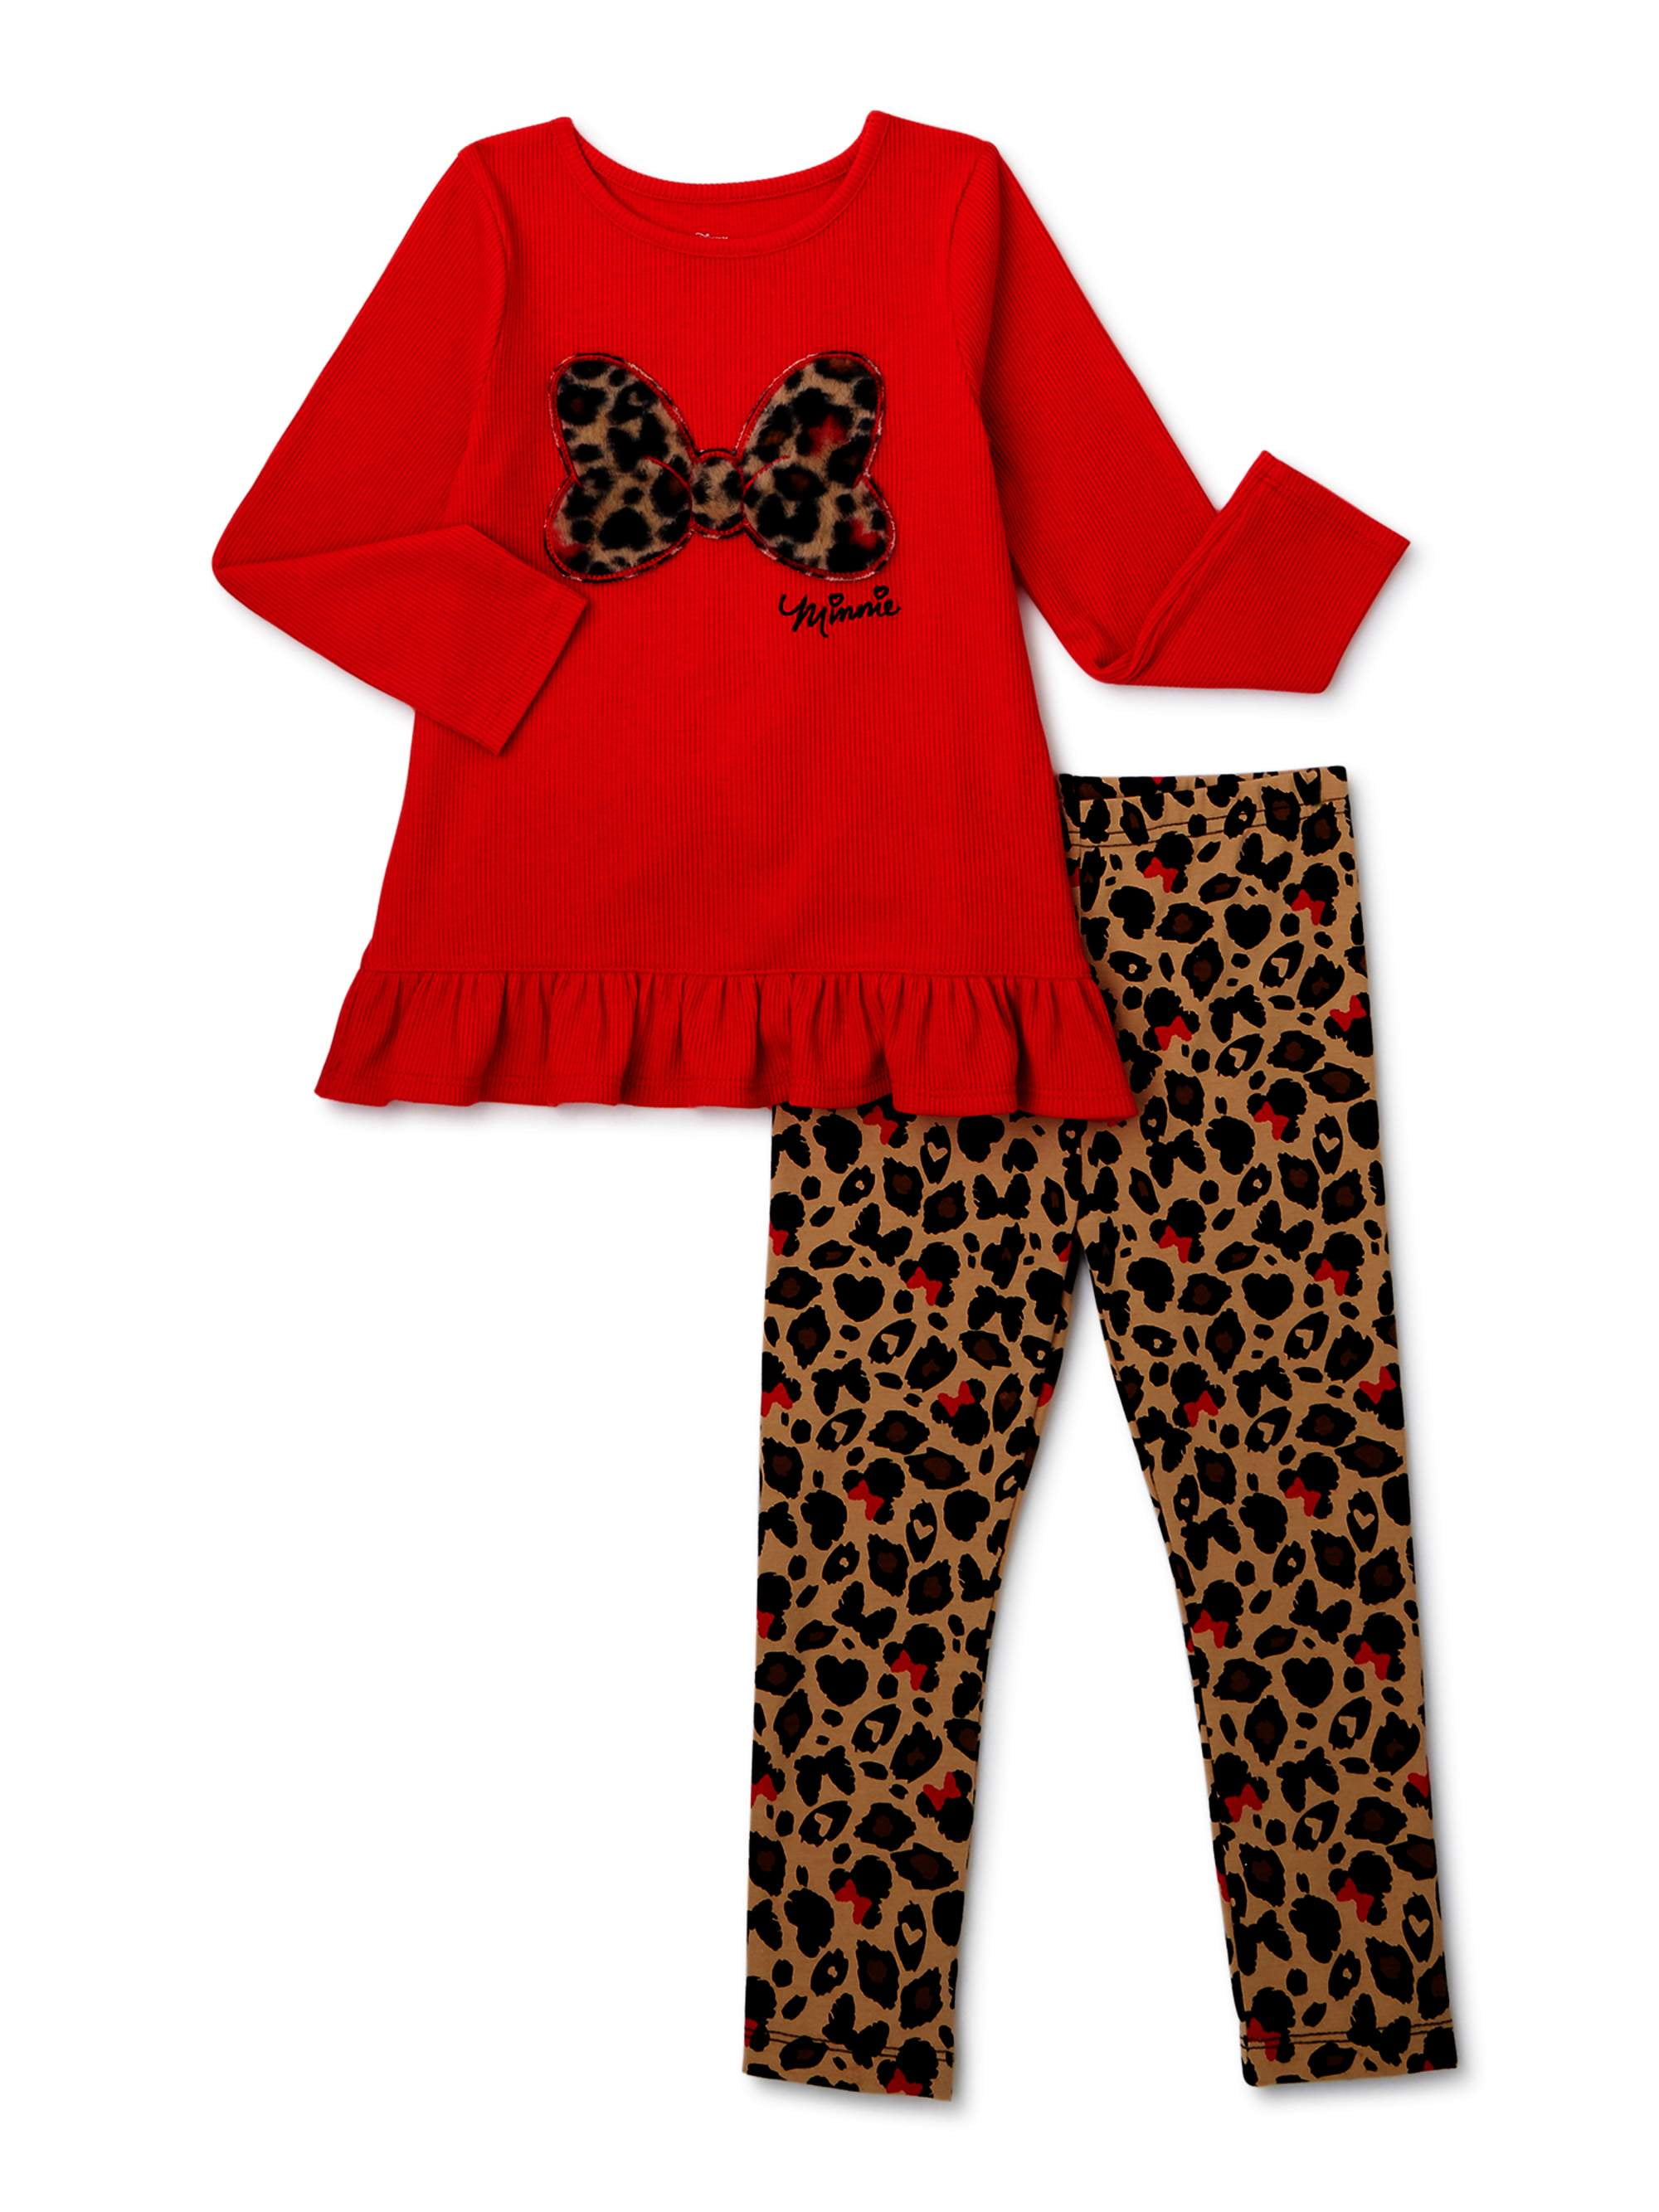 Kid's Baby Girl Minnie Mouse Sweatshirt Tops Pants Set Tracksuit Warm Outfit